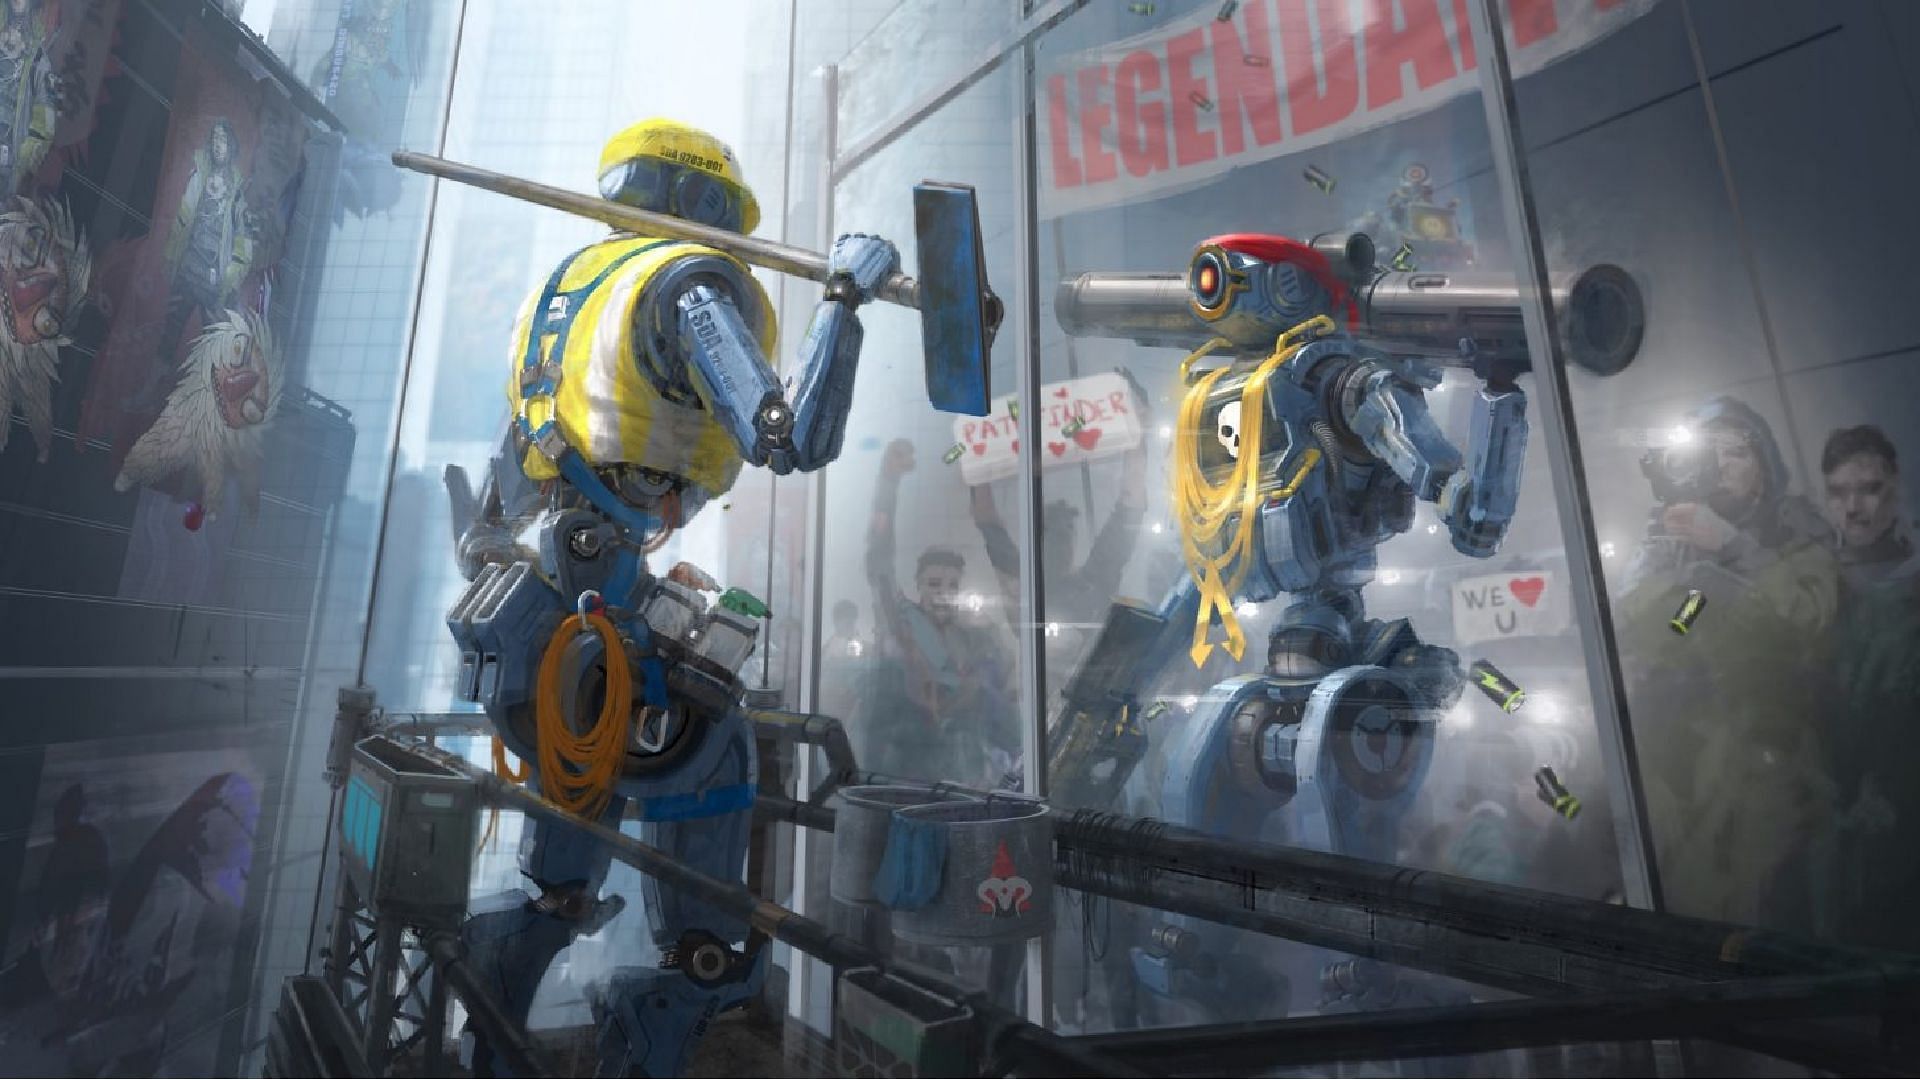 Pathfinder cleaning windows with a mop (Image via Electronic Arts)